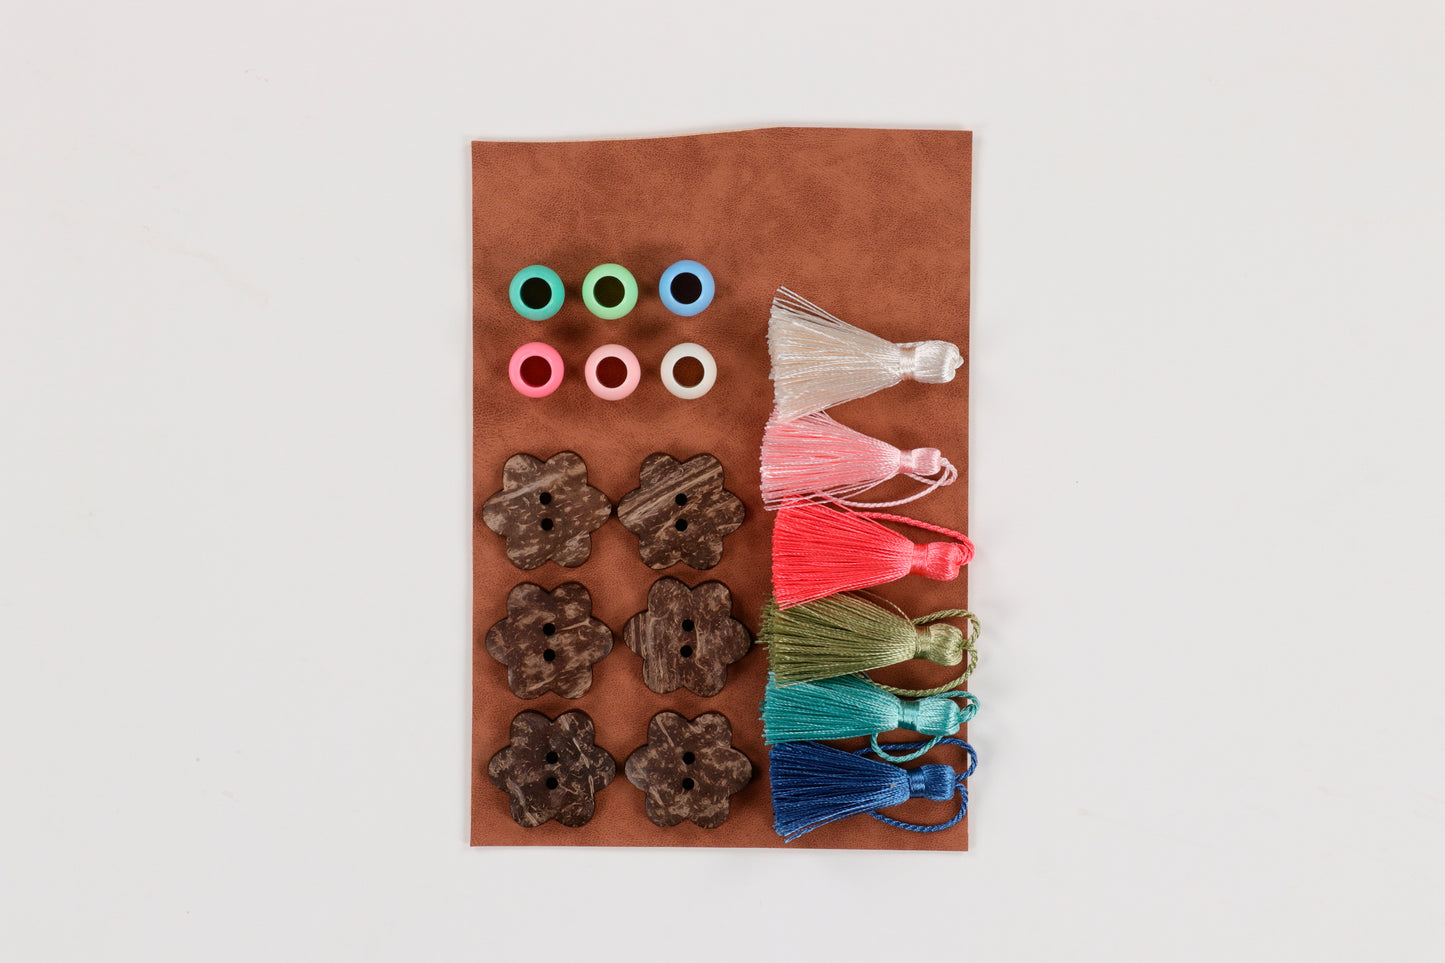 With the Happy Place Embroidery Projects Embellishment Kit (KDKB1292), create stunning gifts and decor with leather, tassels, and beautiful beads! Photo shows the contents of the package.